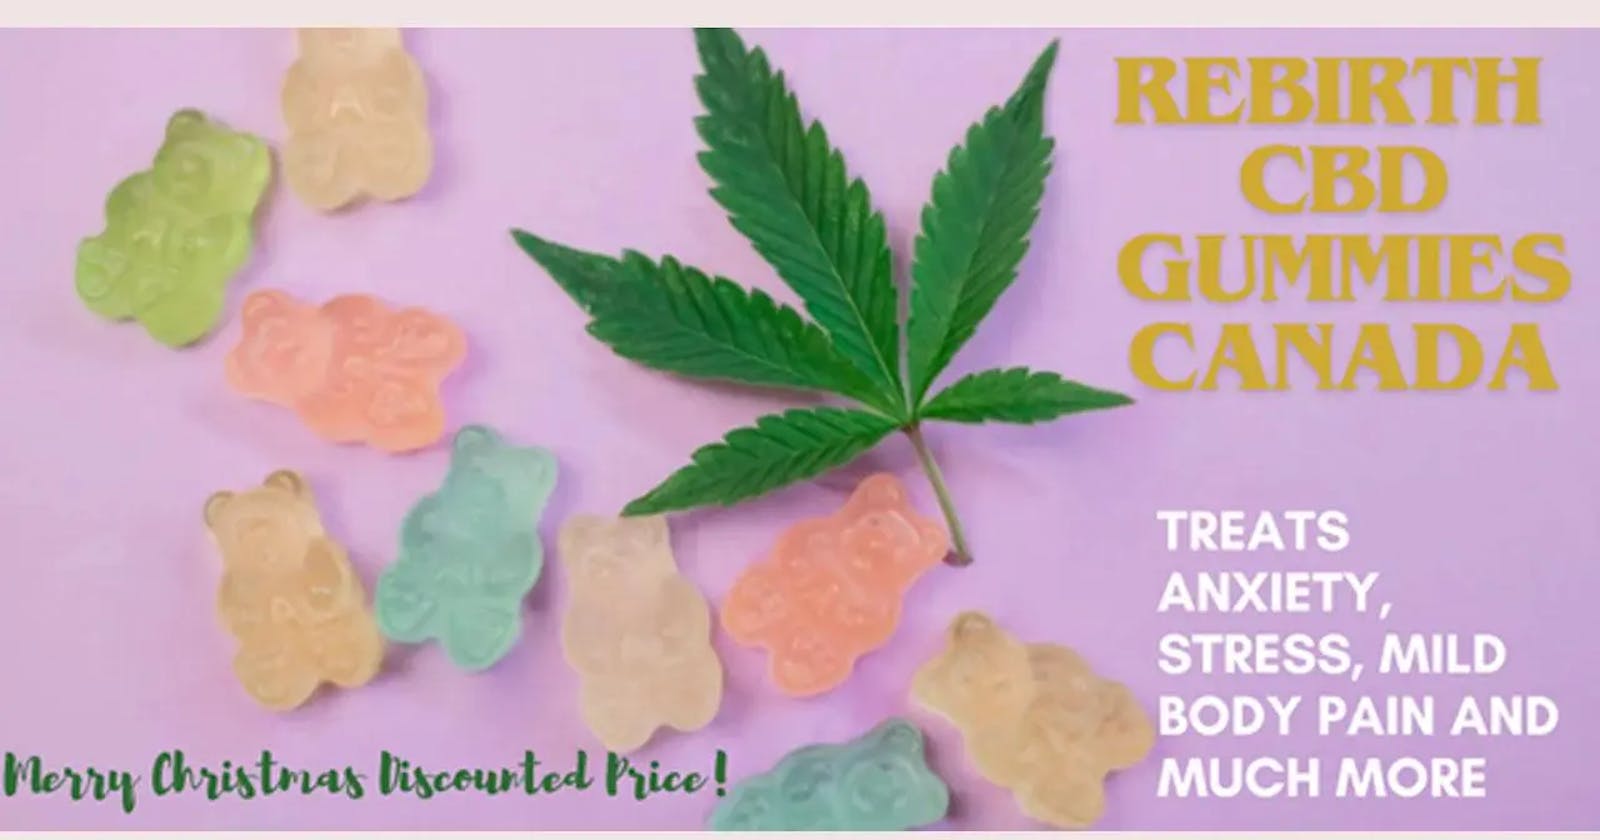 Rebirth CBD Gummies Canada Reviews, Relief From Anxiety, Stress, Joint Pain, Support Physically & Mentally, Price!